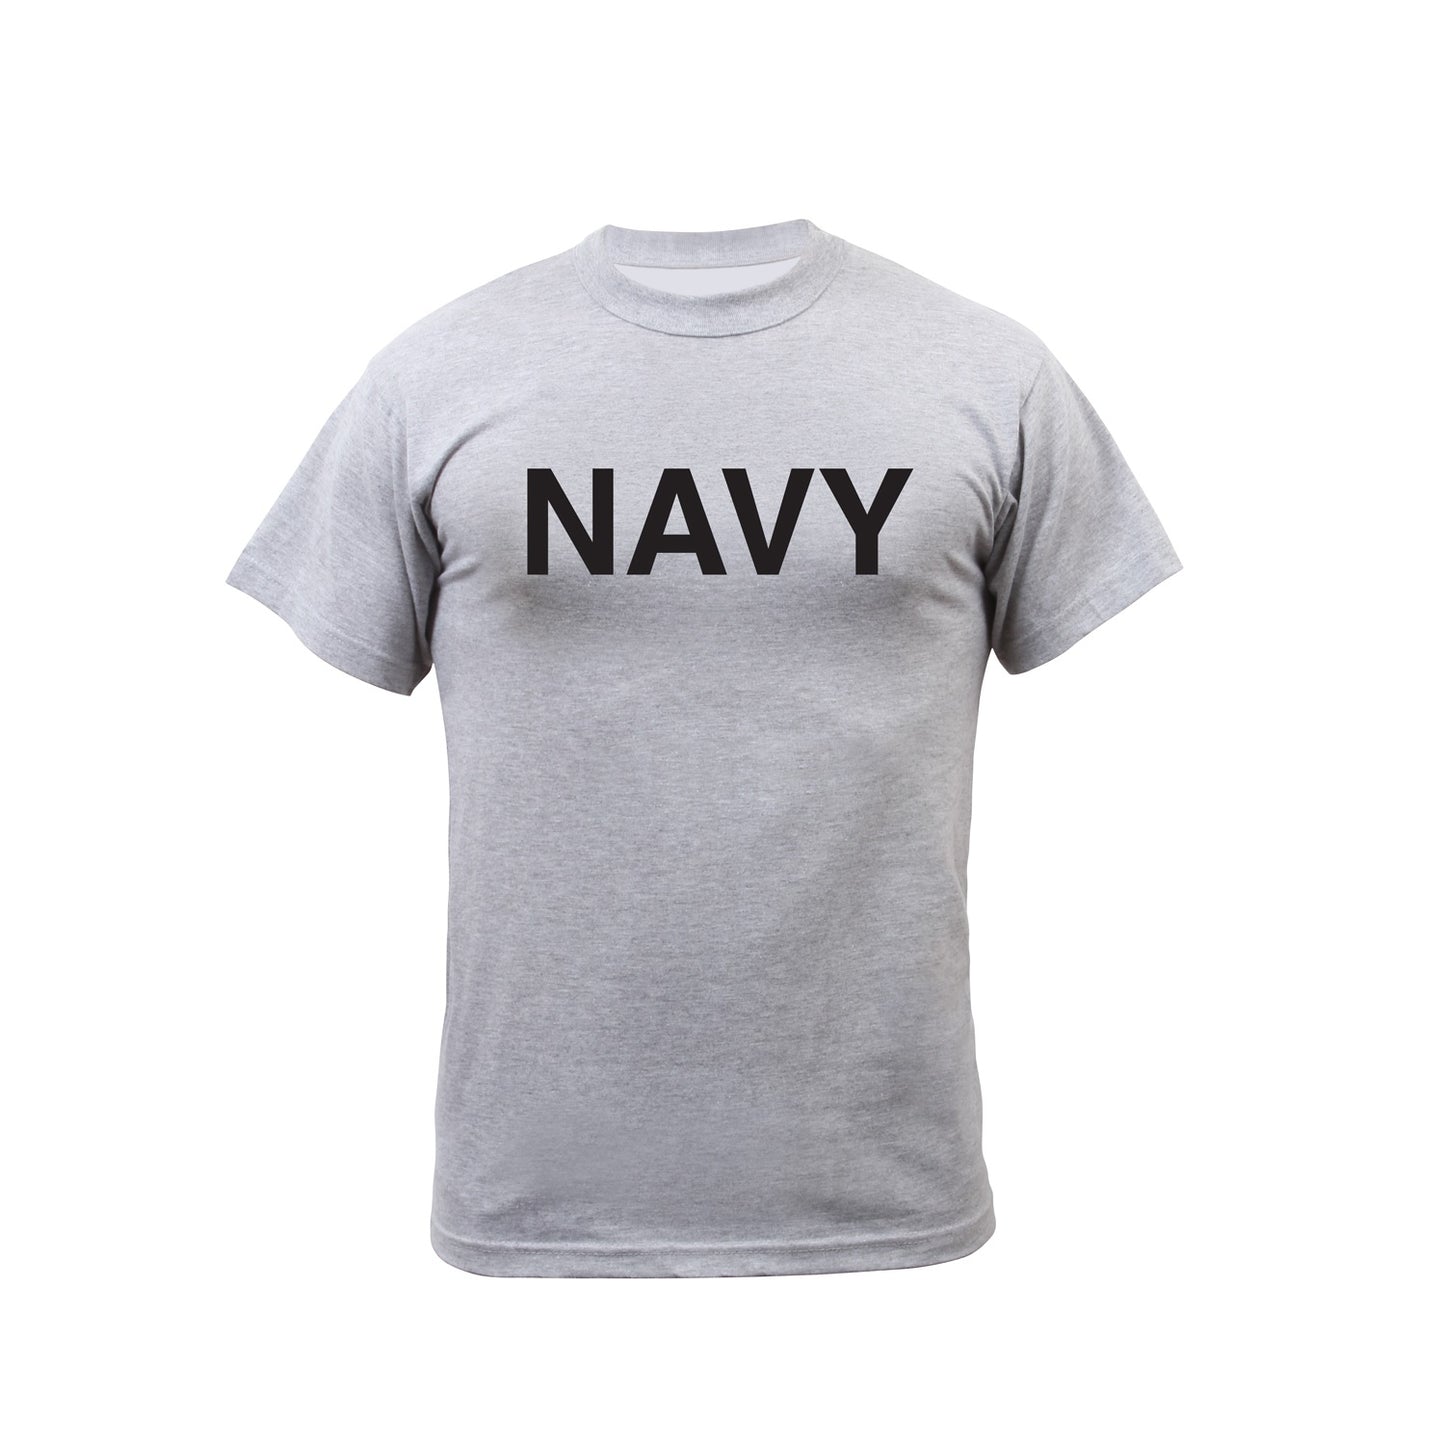 Men's Grey Navy Physical Training T-Shirt - Tee by Rothco